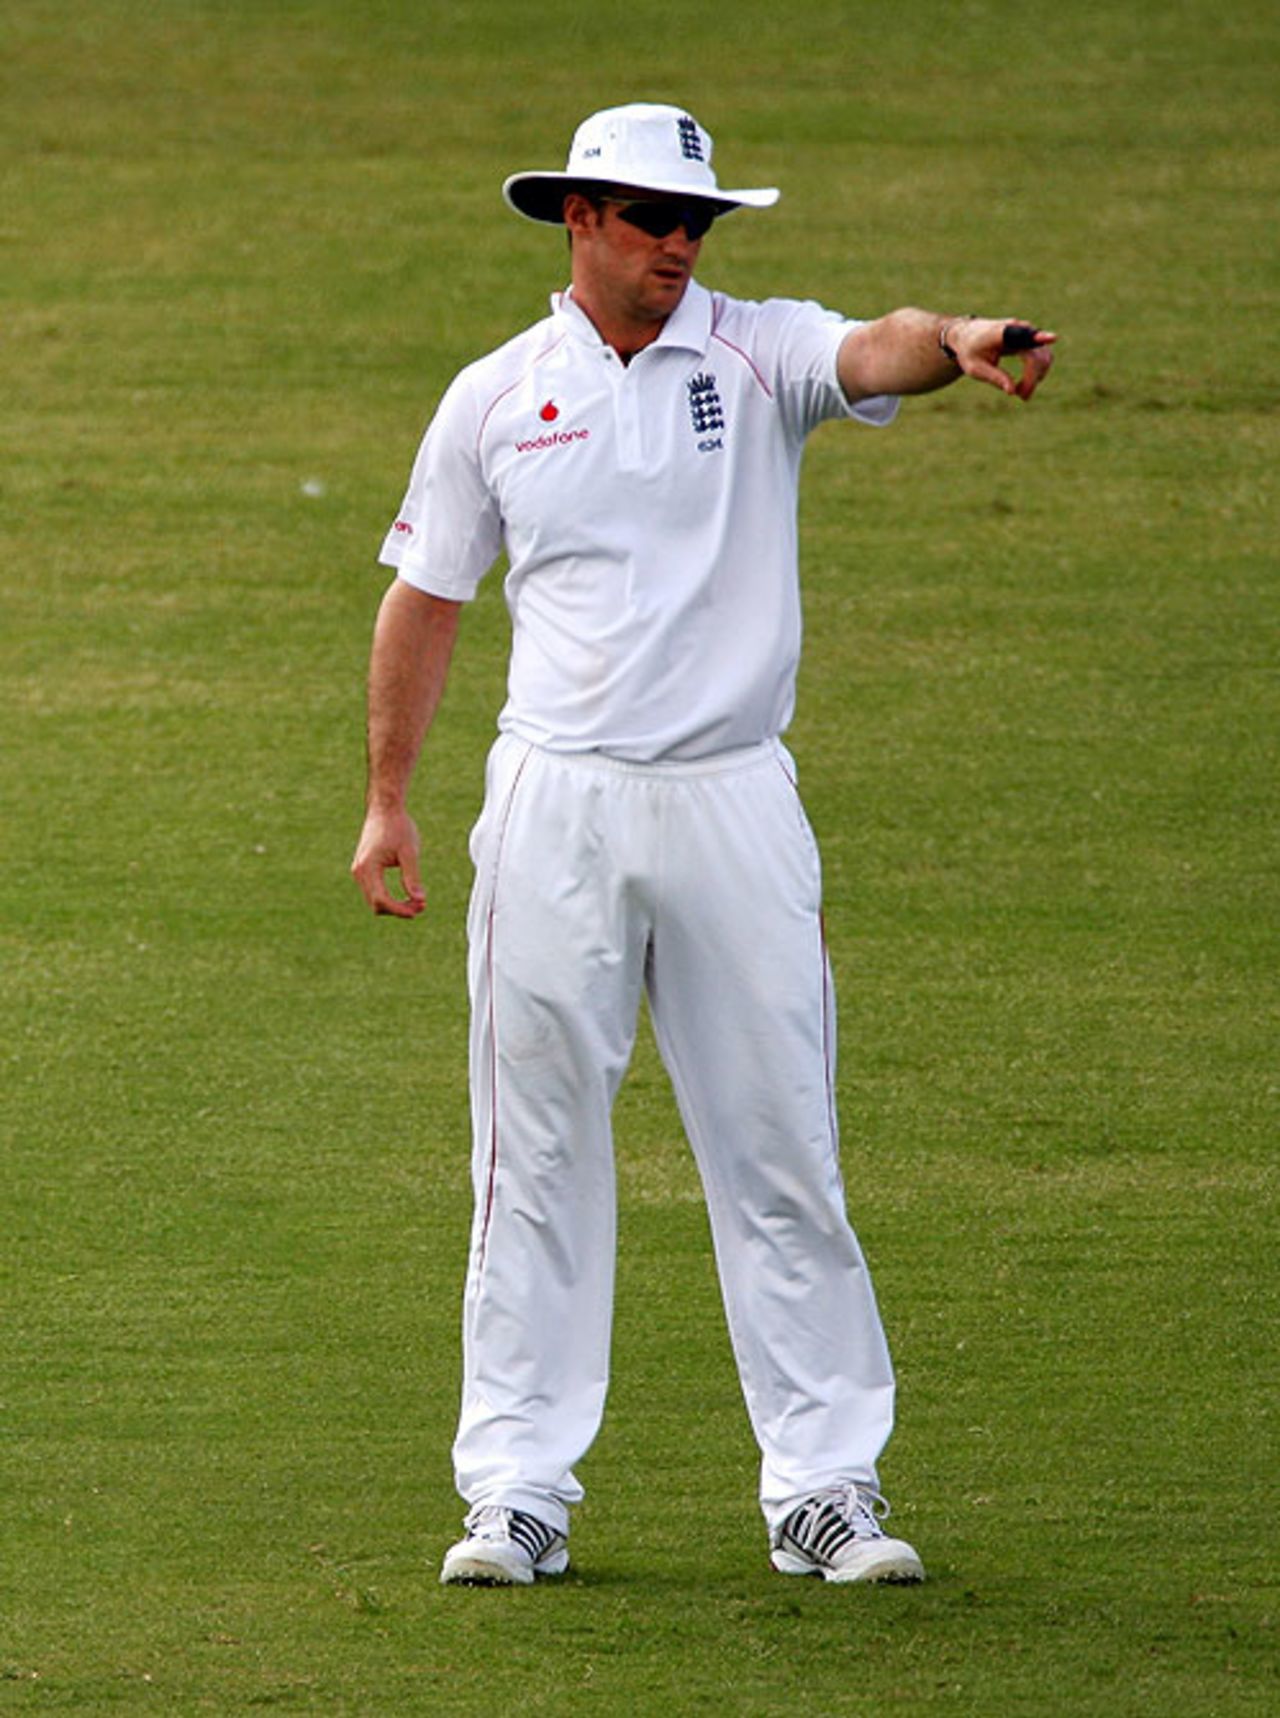 Andrew Strauss calls the shots in the field, St Kitts Invitational XI v England XI, Warner Park, January 26, 209